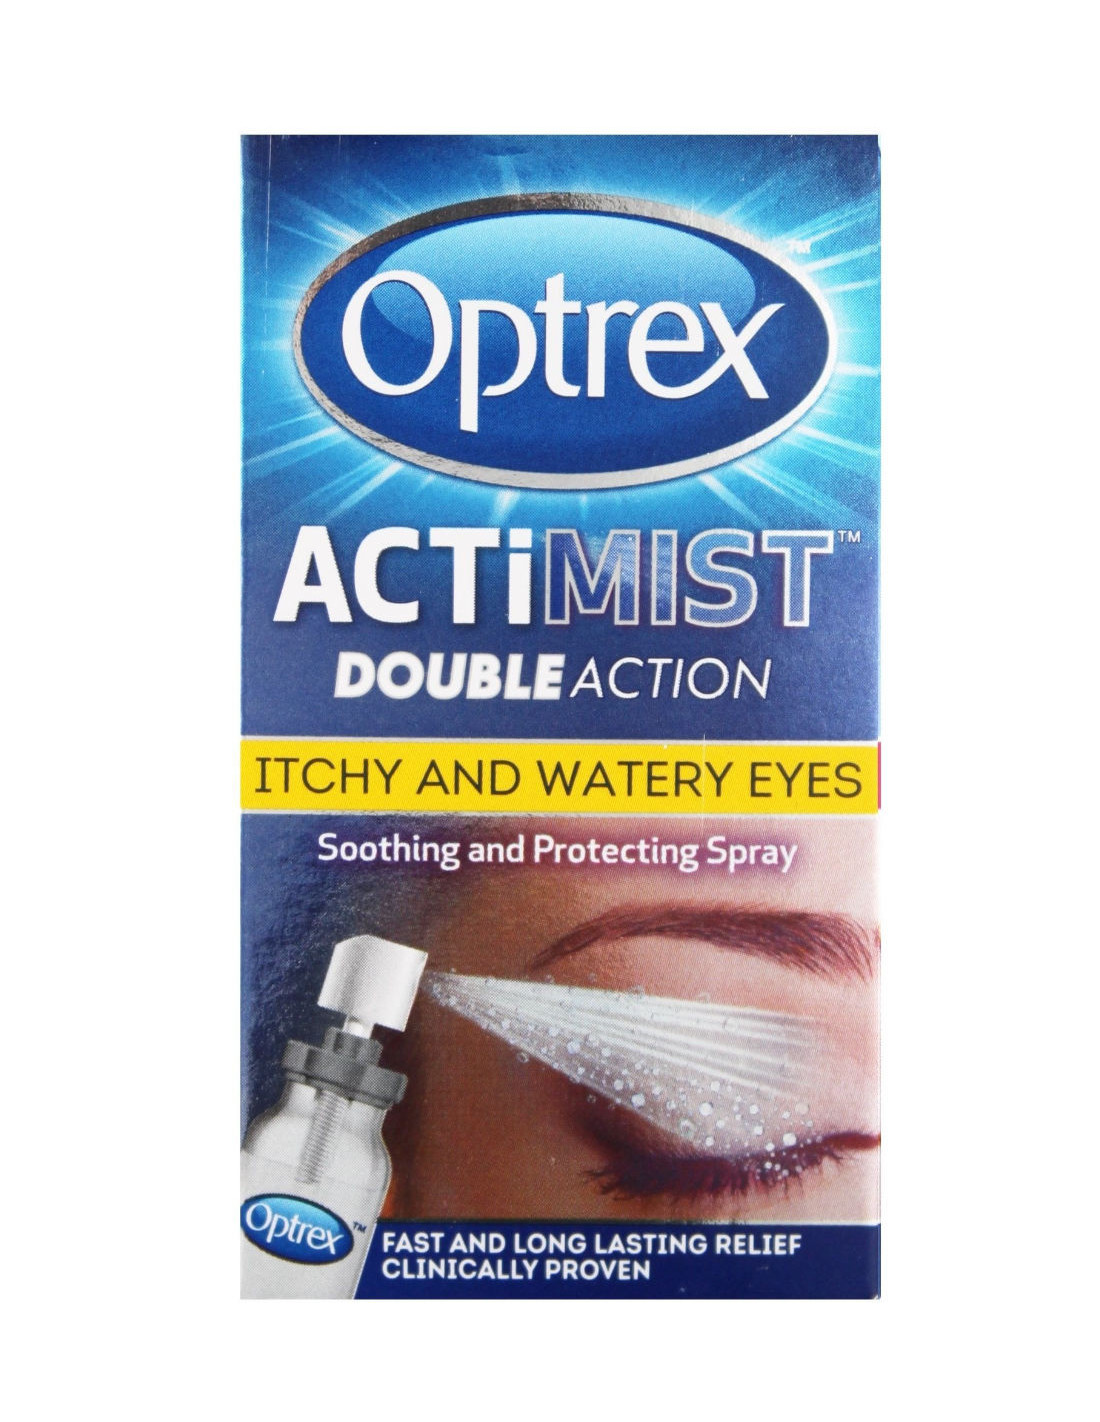 Optrex Actimist Double Action Itchy And Watery Eyes